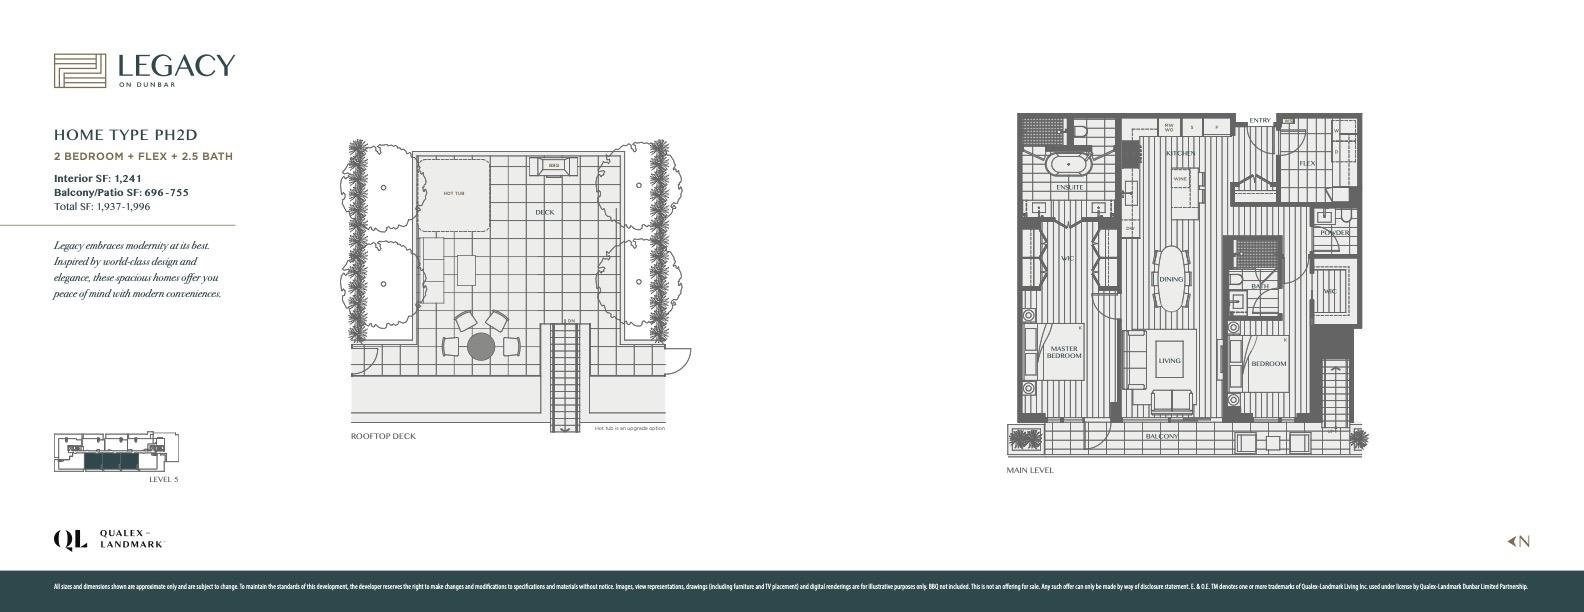 PH2D Plan - 2 Bedroom + Flex + 2.5 Baths + 700 sqft of outdoor space inc. roof top deck with fire bowl.